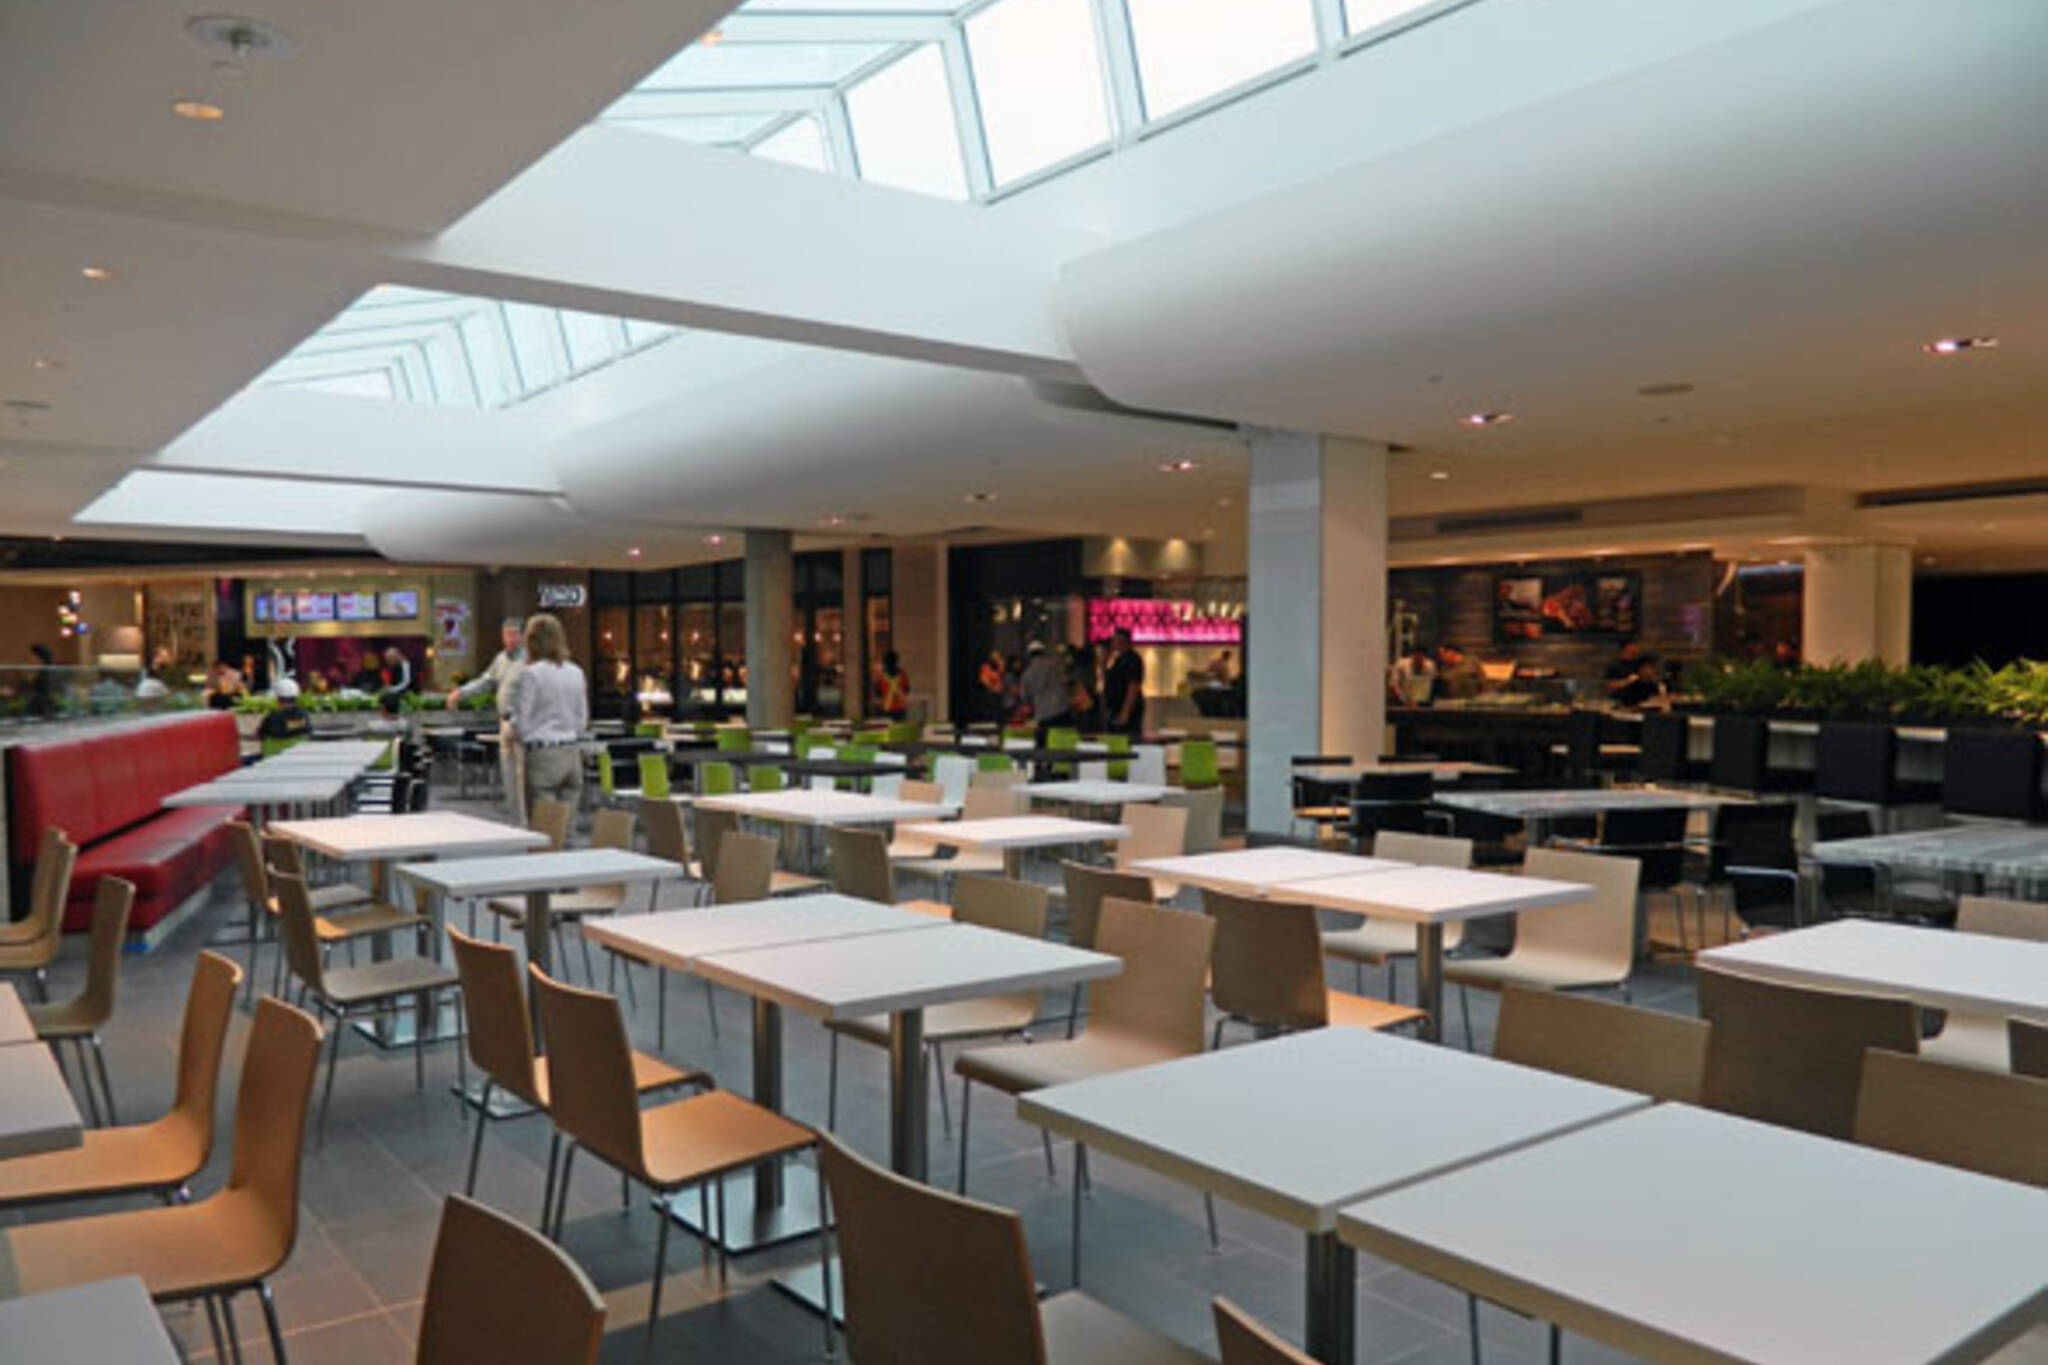 Yorkdale mall gets a major upgrade to its food court